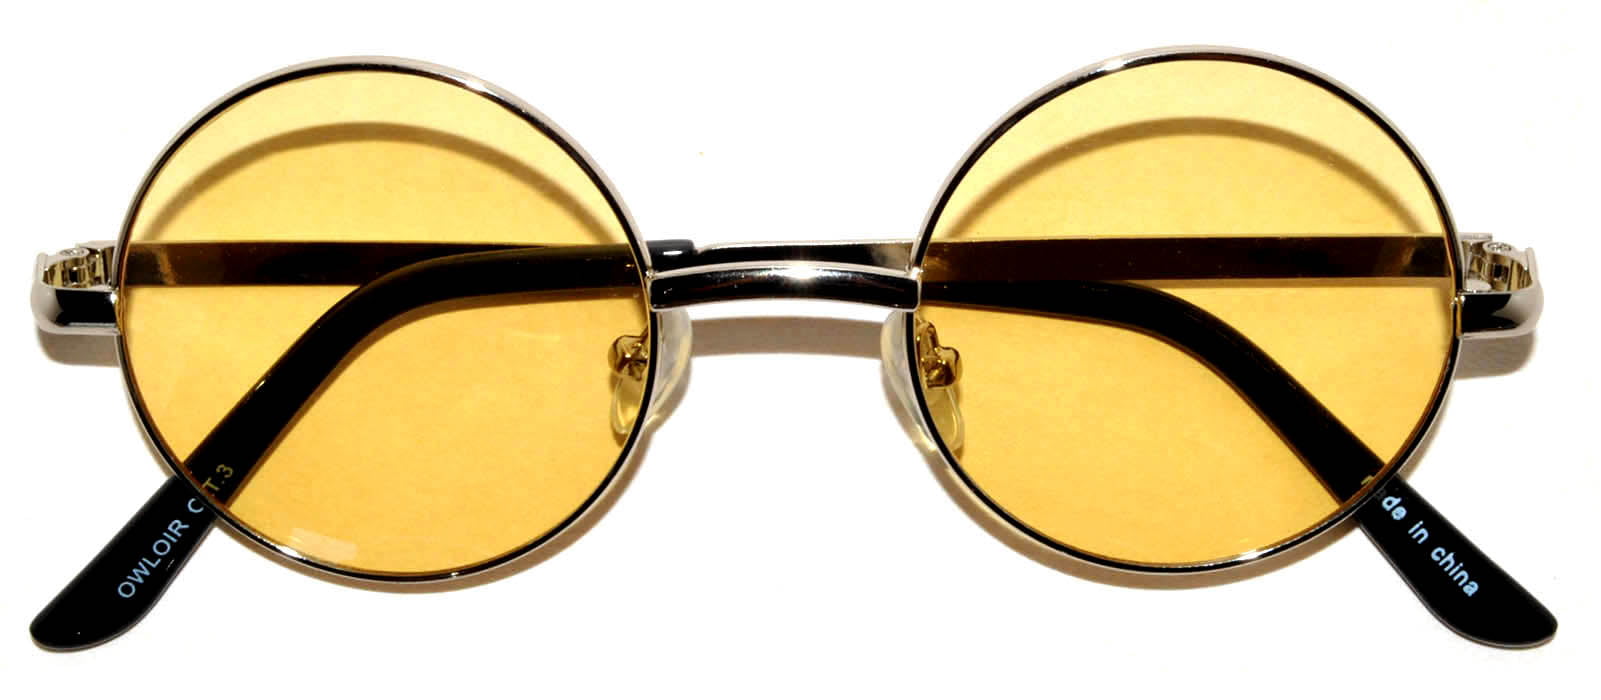 CREATURE Silver Stripped Round Sunglasses (Lens-Yellow|Frame-Silver)